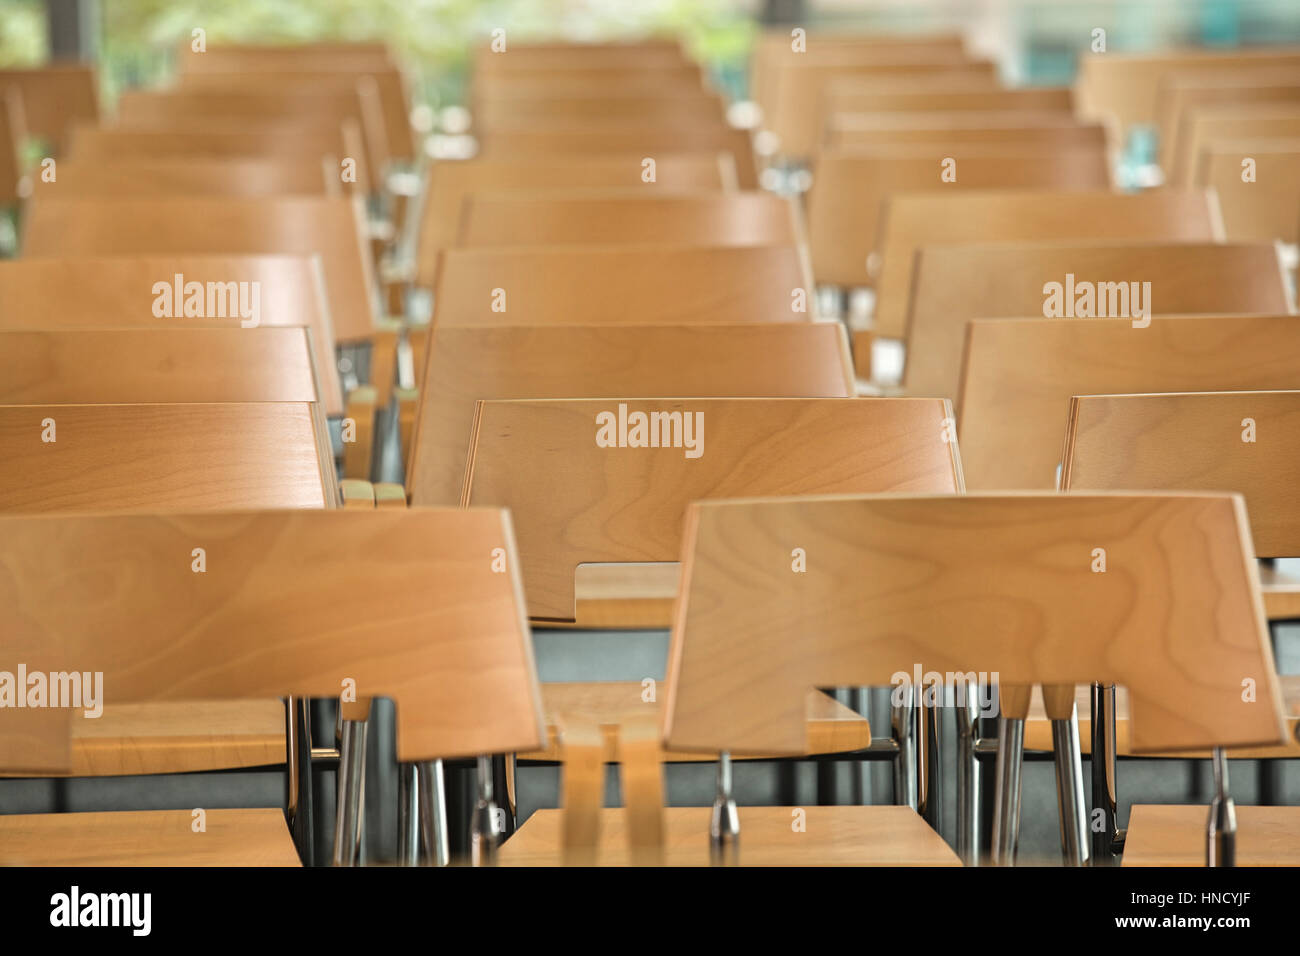 Rows of empty chairs in office Stock Photo